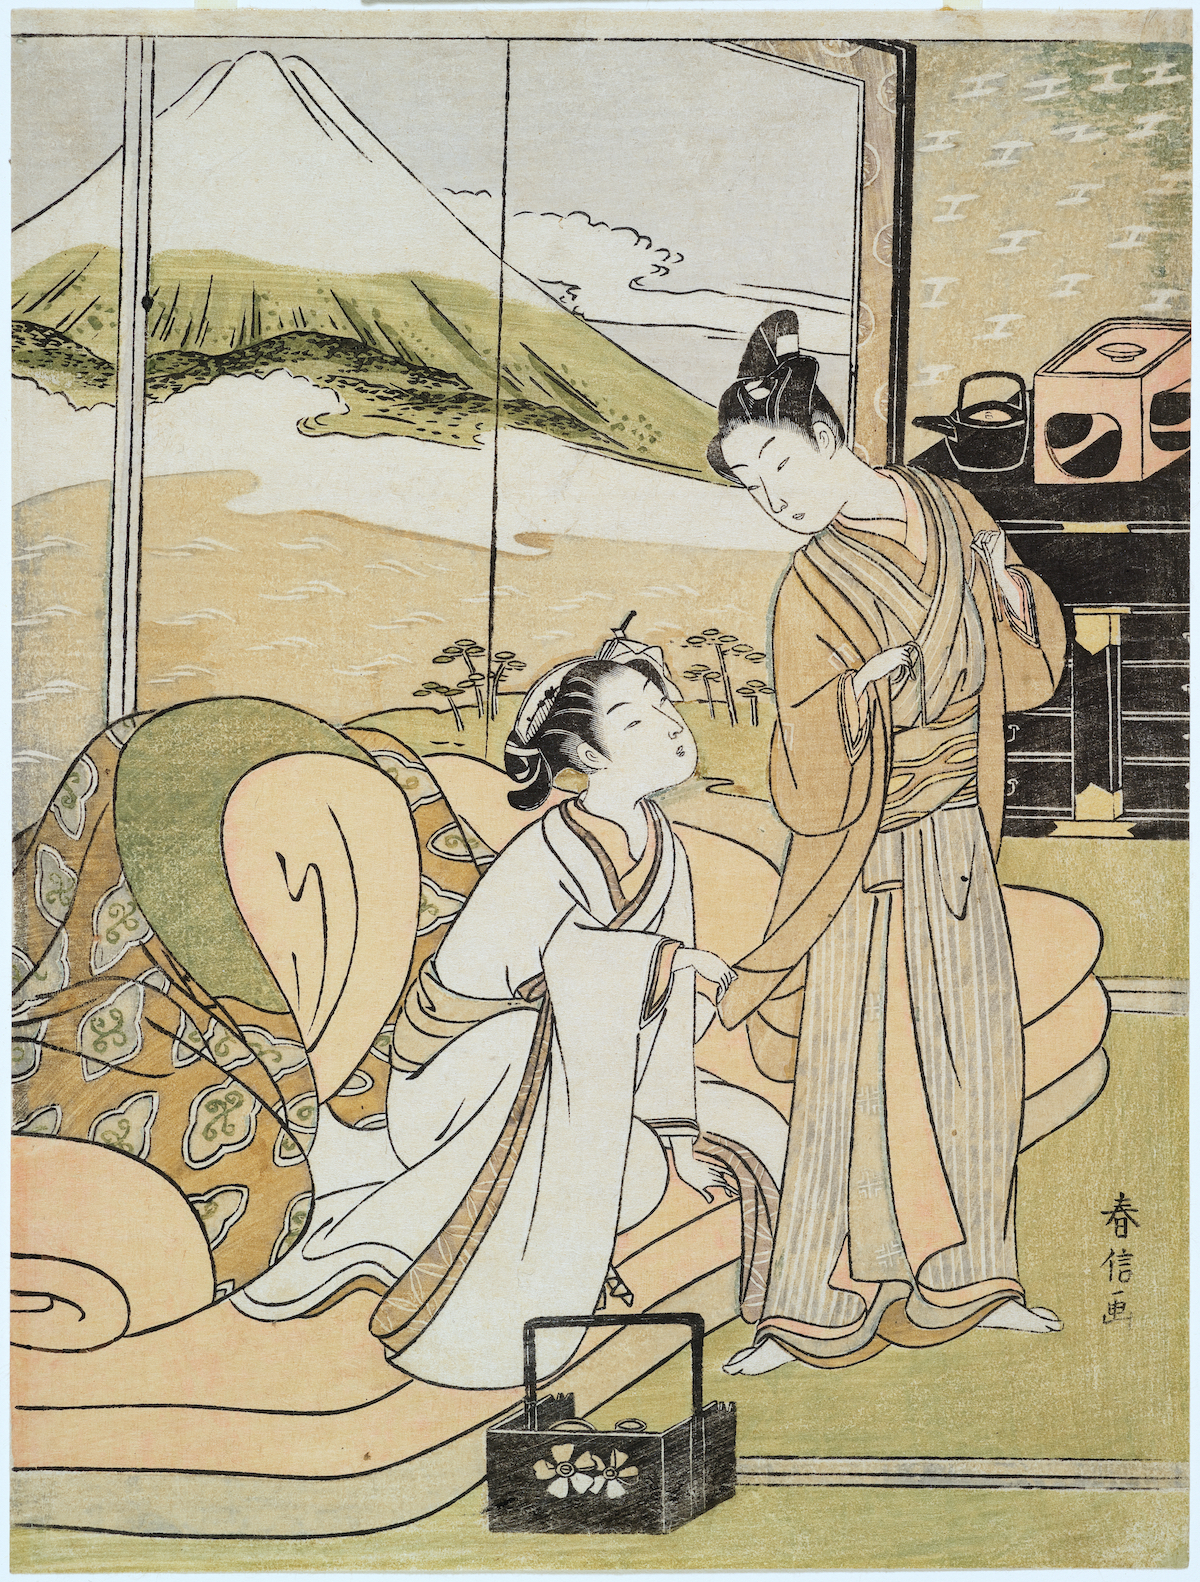 When Gender in Japan Included Men, Women—and Wakashu